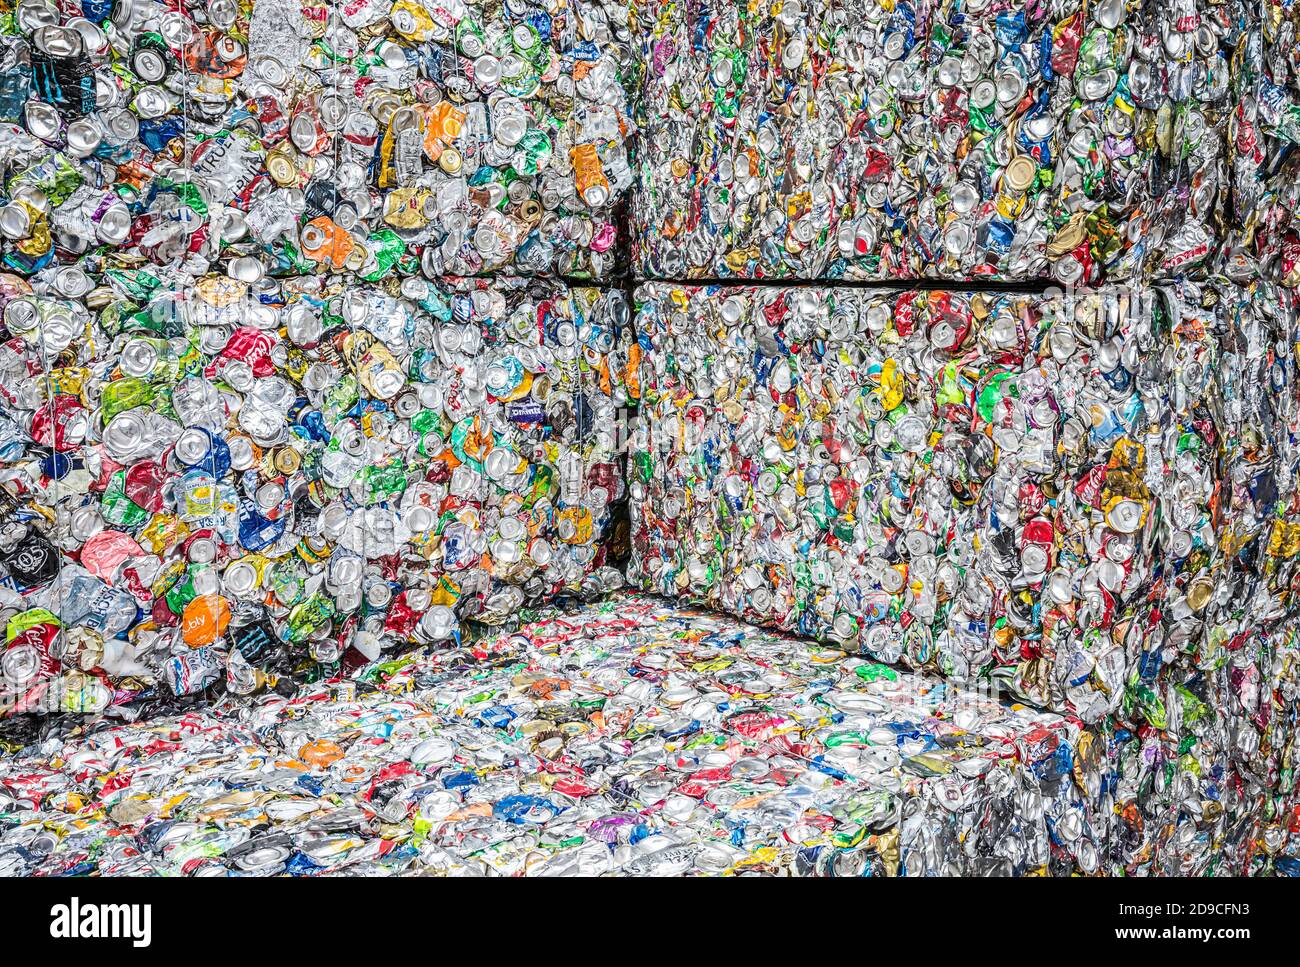 Stacked cubes or bales of aluminum cans crushed into blocks for recycling. Stock Photo